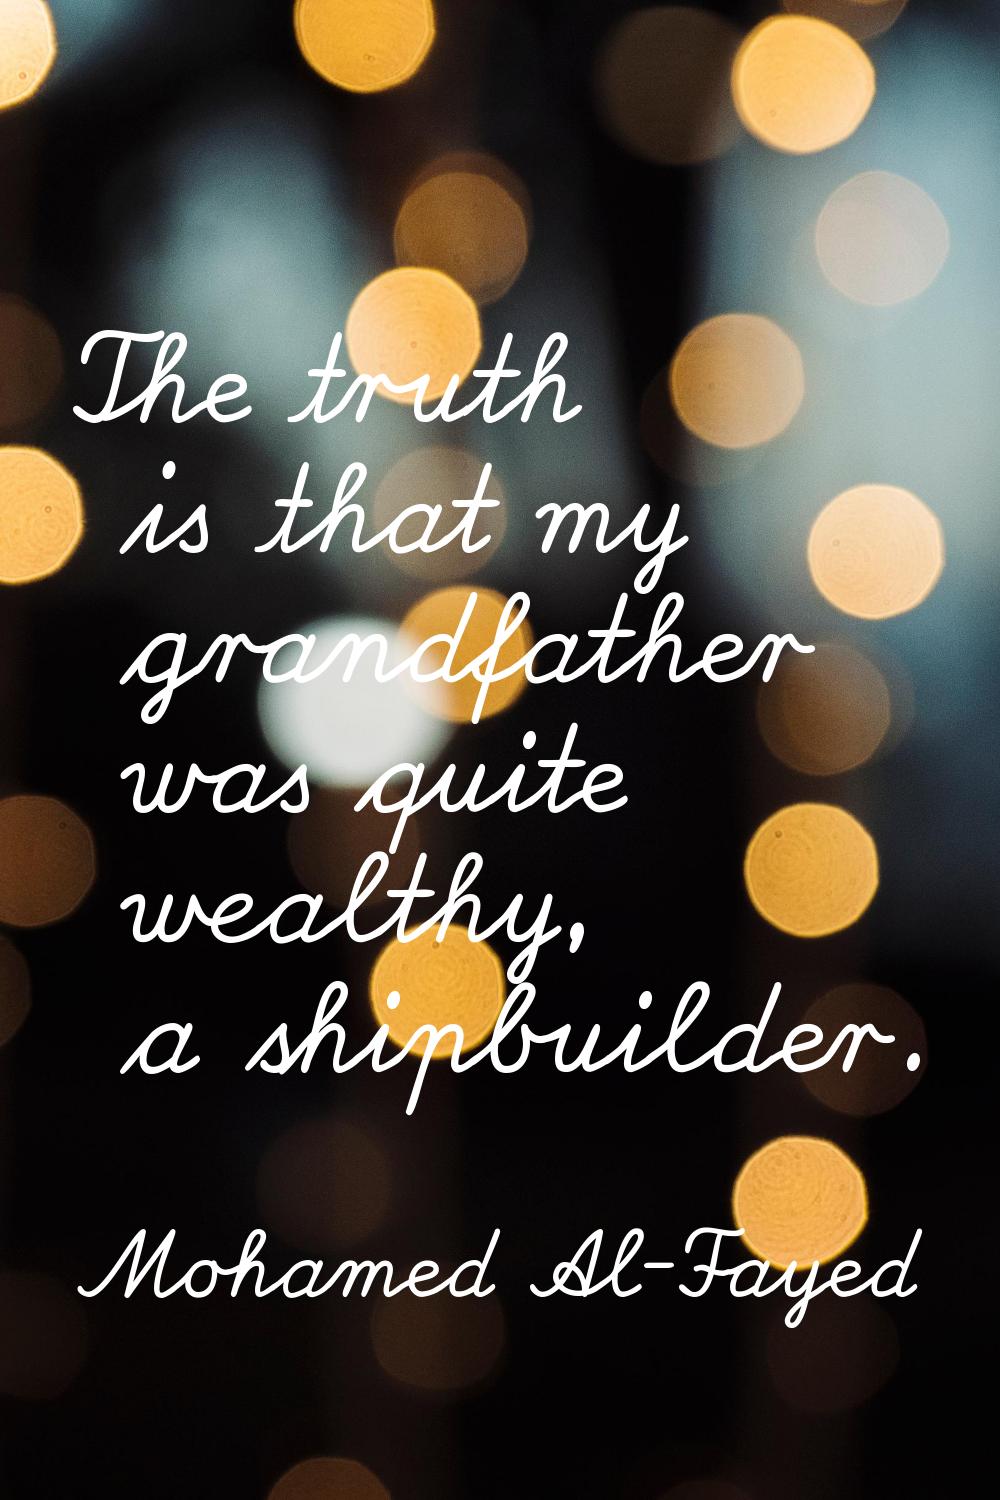 The truth is that my grandfather was quite wealthy, a shipbuilder.